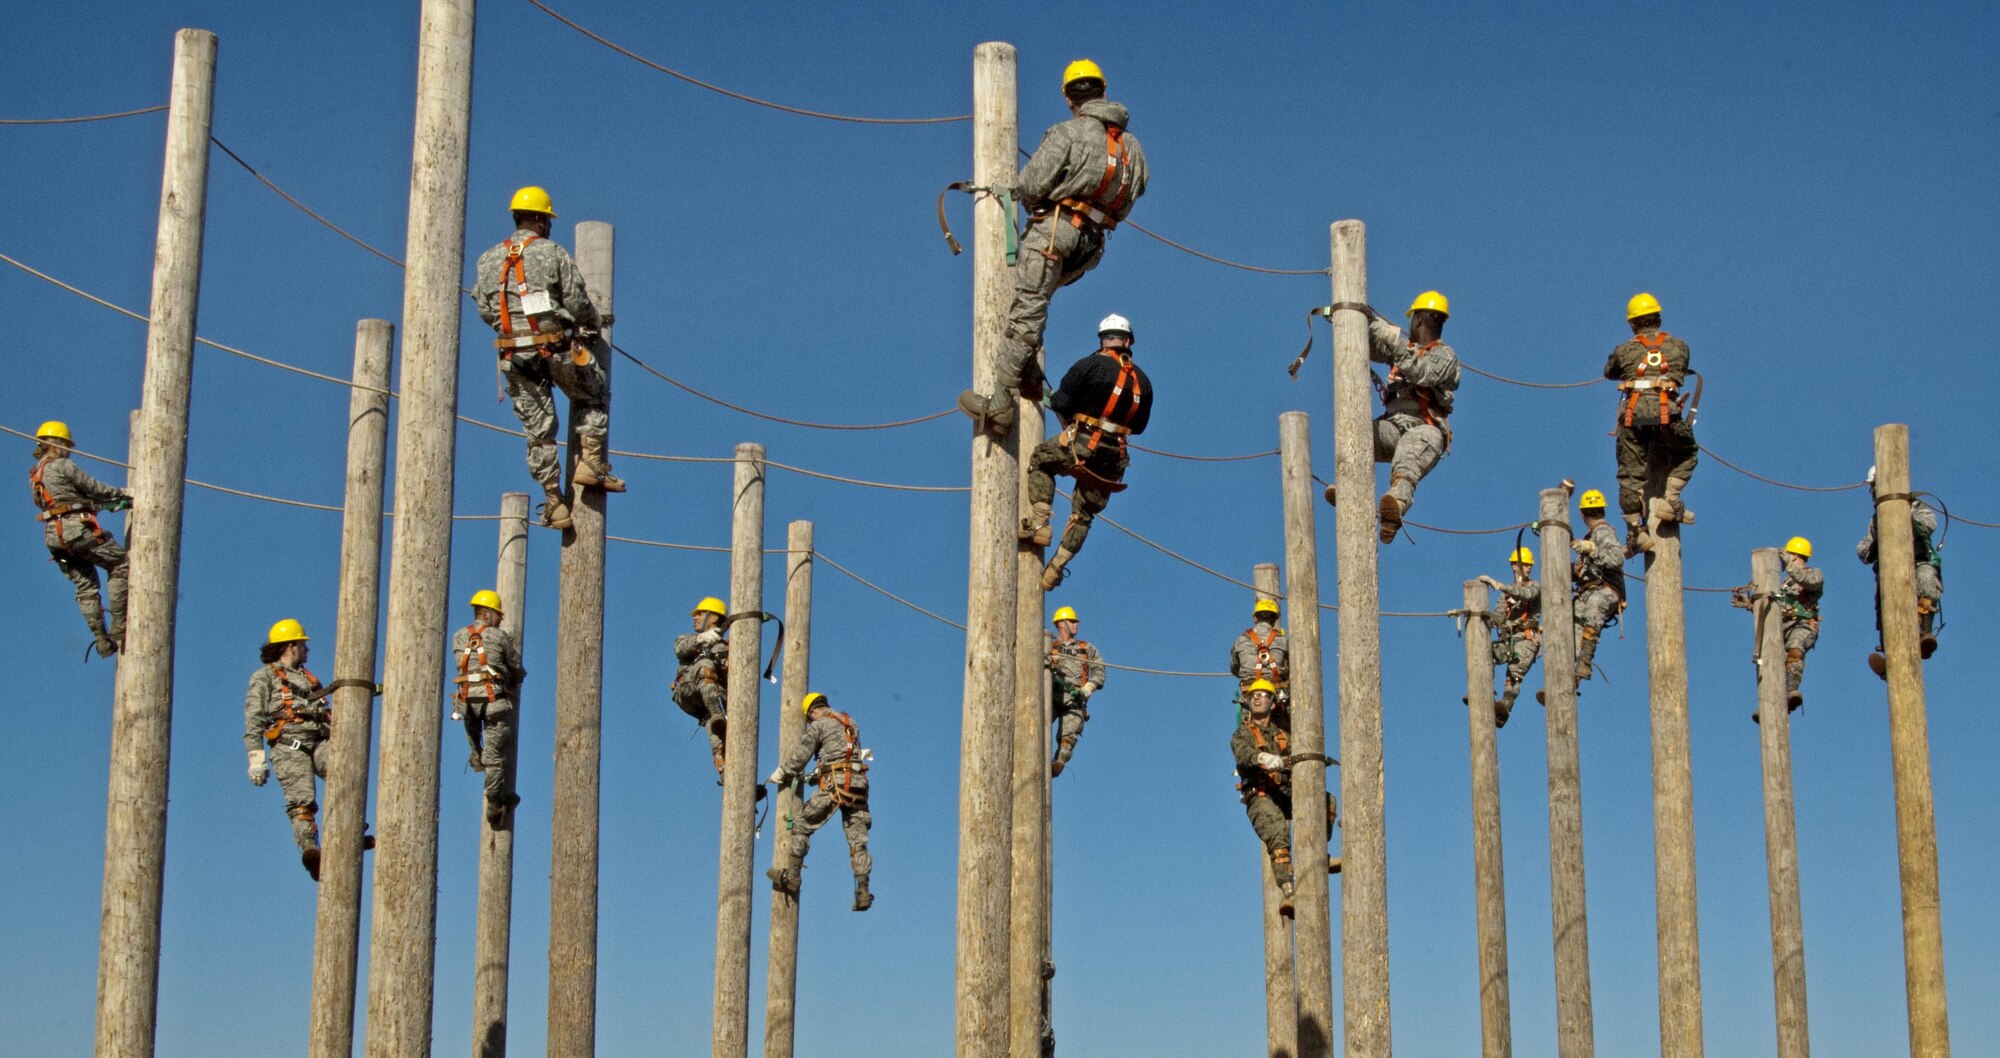 Students of the 364th Training Squadron's electrical systems course practice climbing power poles as part of a familiarization and trust exercise with the safety equipment Feb. 3, 2015, at Sheppard Air Force Base, Texas. They spent an extended period suspended to simulate a lengthy installation or repair as part of the training. 